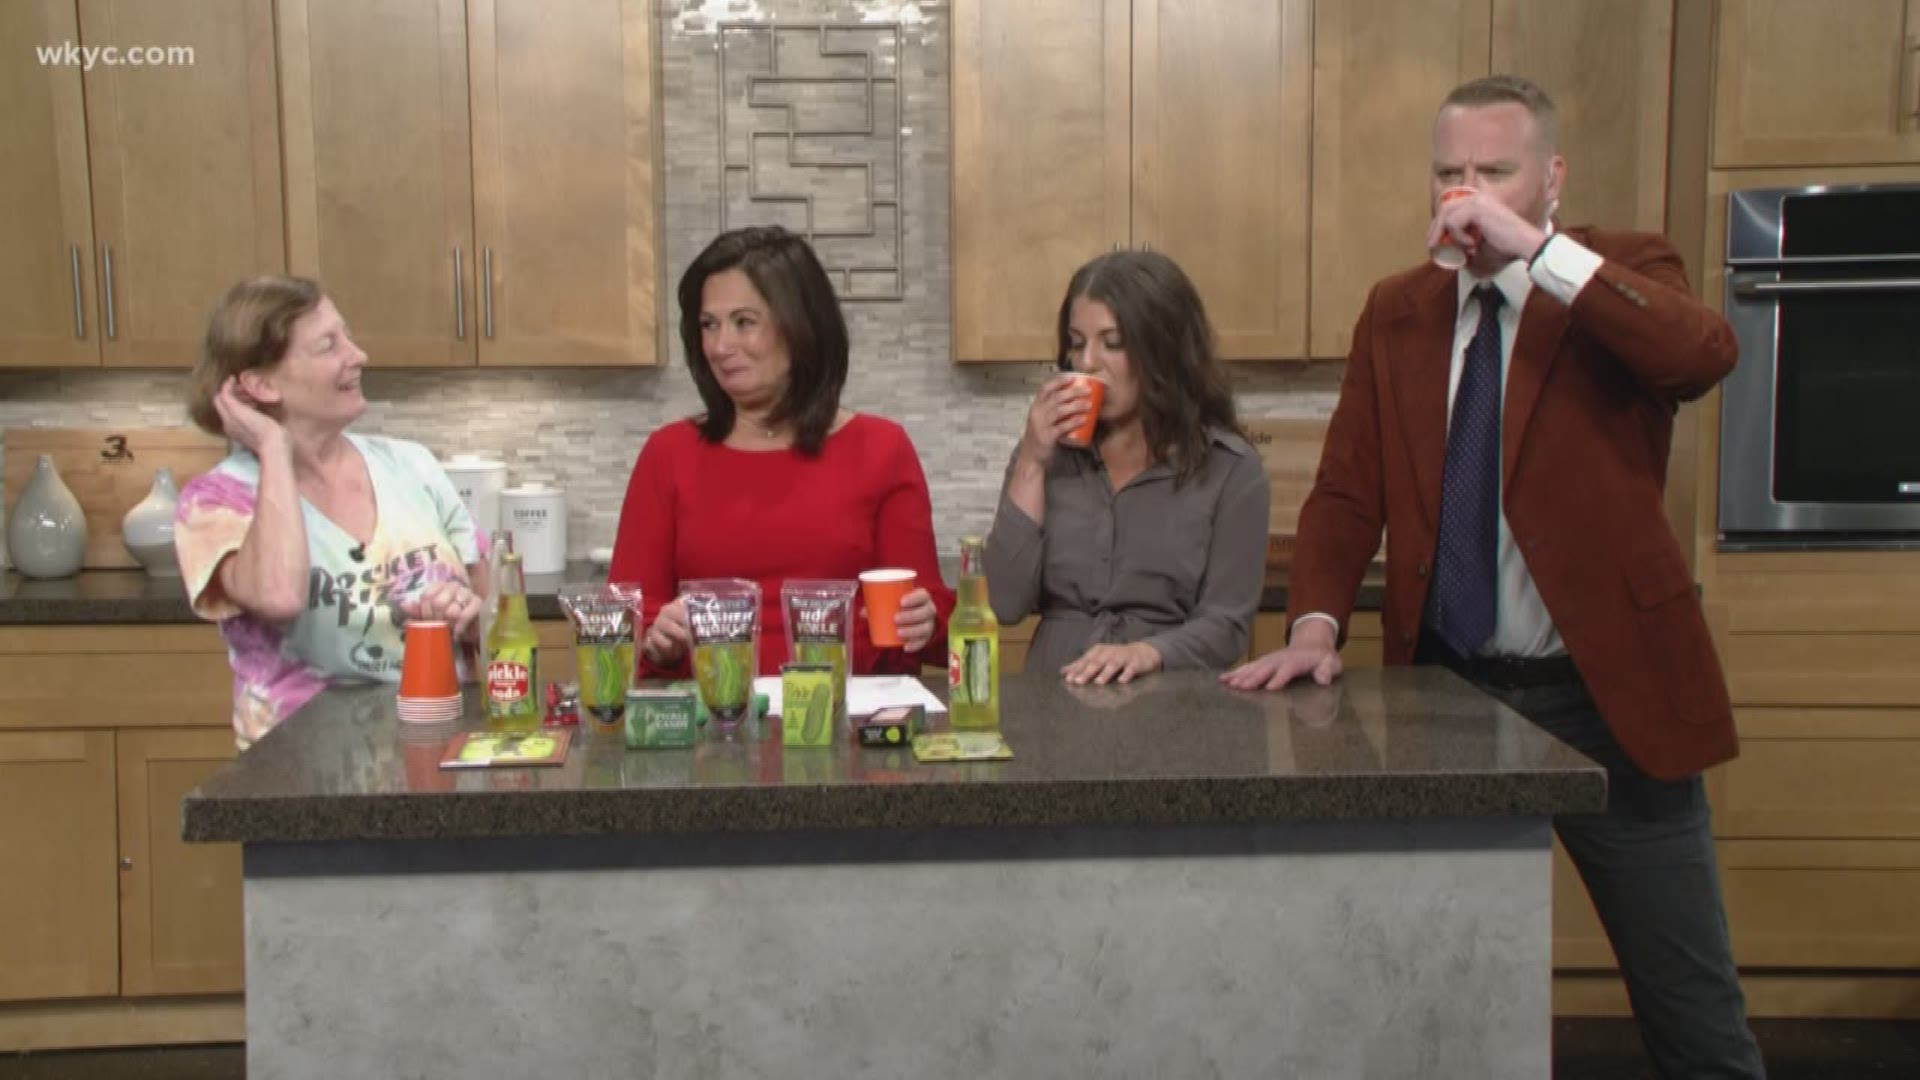 The Cleveland Pickle Fest is set for this Saturday.  Danielle Serino and Mike Polk Jr. try some pickle soda, which is among the products you can enjoy at the festival.